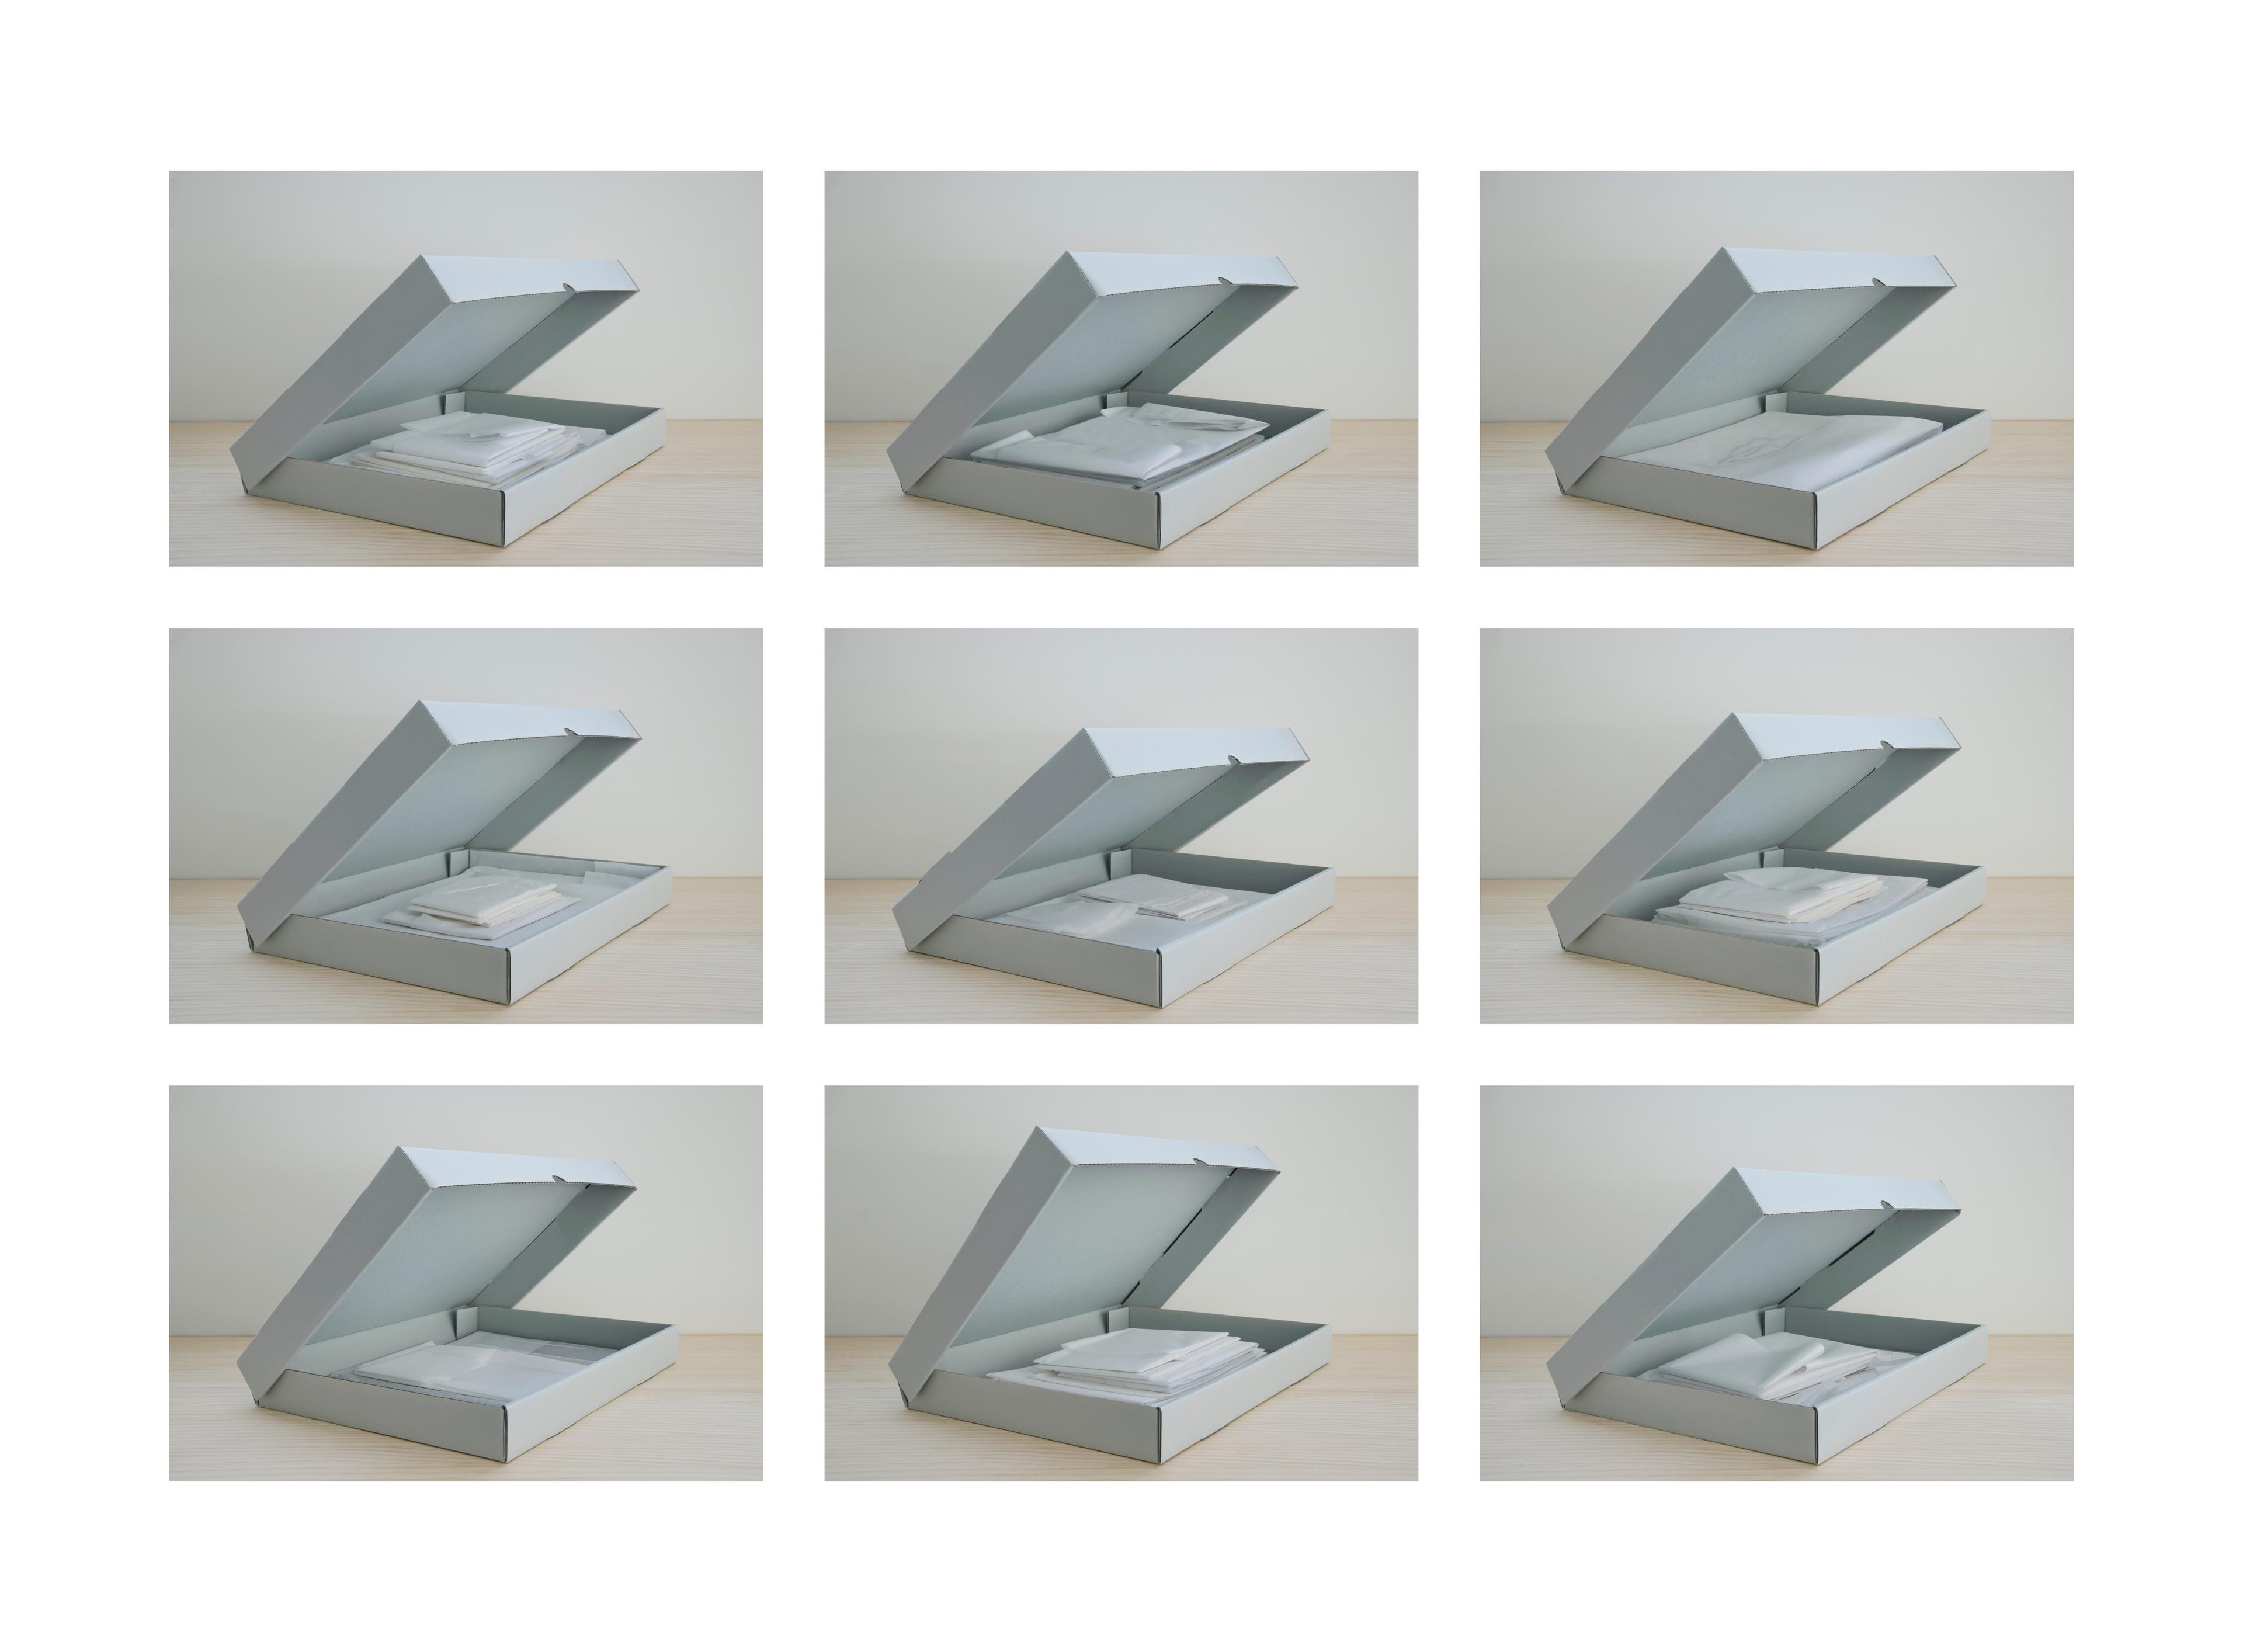 Grid of 9 photographs showing different archive boxes with lids open revealing various wrapped paper based contents